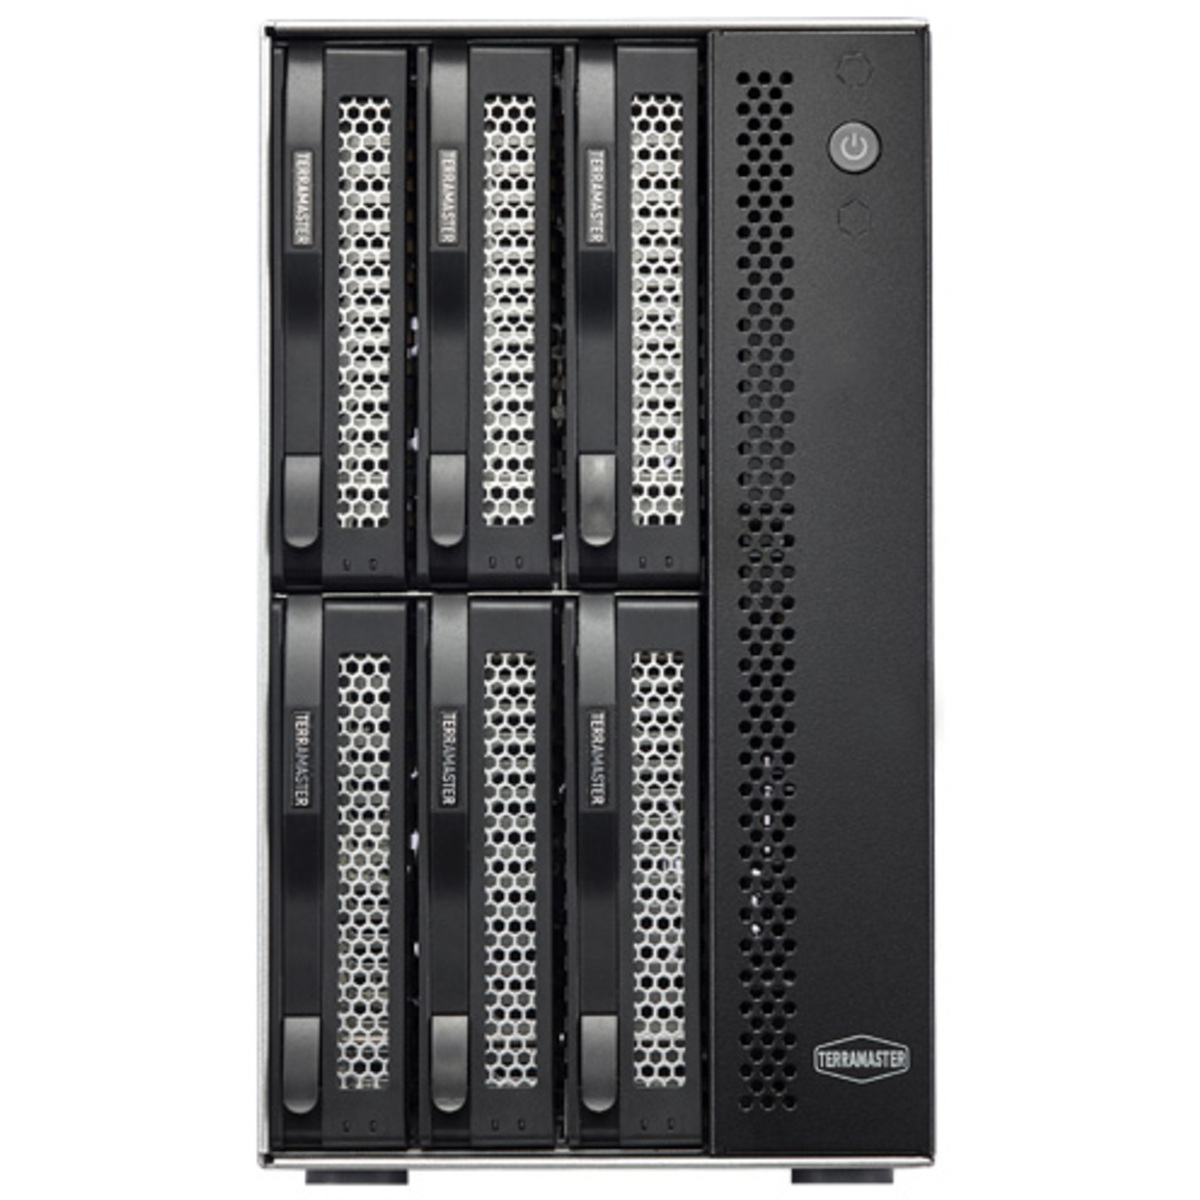 TerraMaster T6-423 60tb 6-Bay Desktop Multimedia / Power User / Business NAS - Network Attached Storage Device 3x20tb Seagate EXOS X20 ST20000NM007D 3.5 7200rpm SATA 6Gb/s HDD ENTERPRISE Class Drives Installed - Burn-In Tested - FREE RAM UPGRADE T6-423